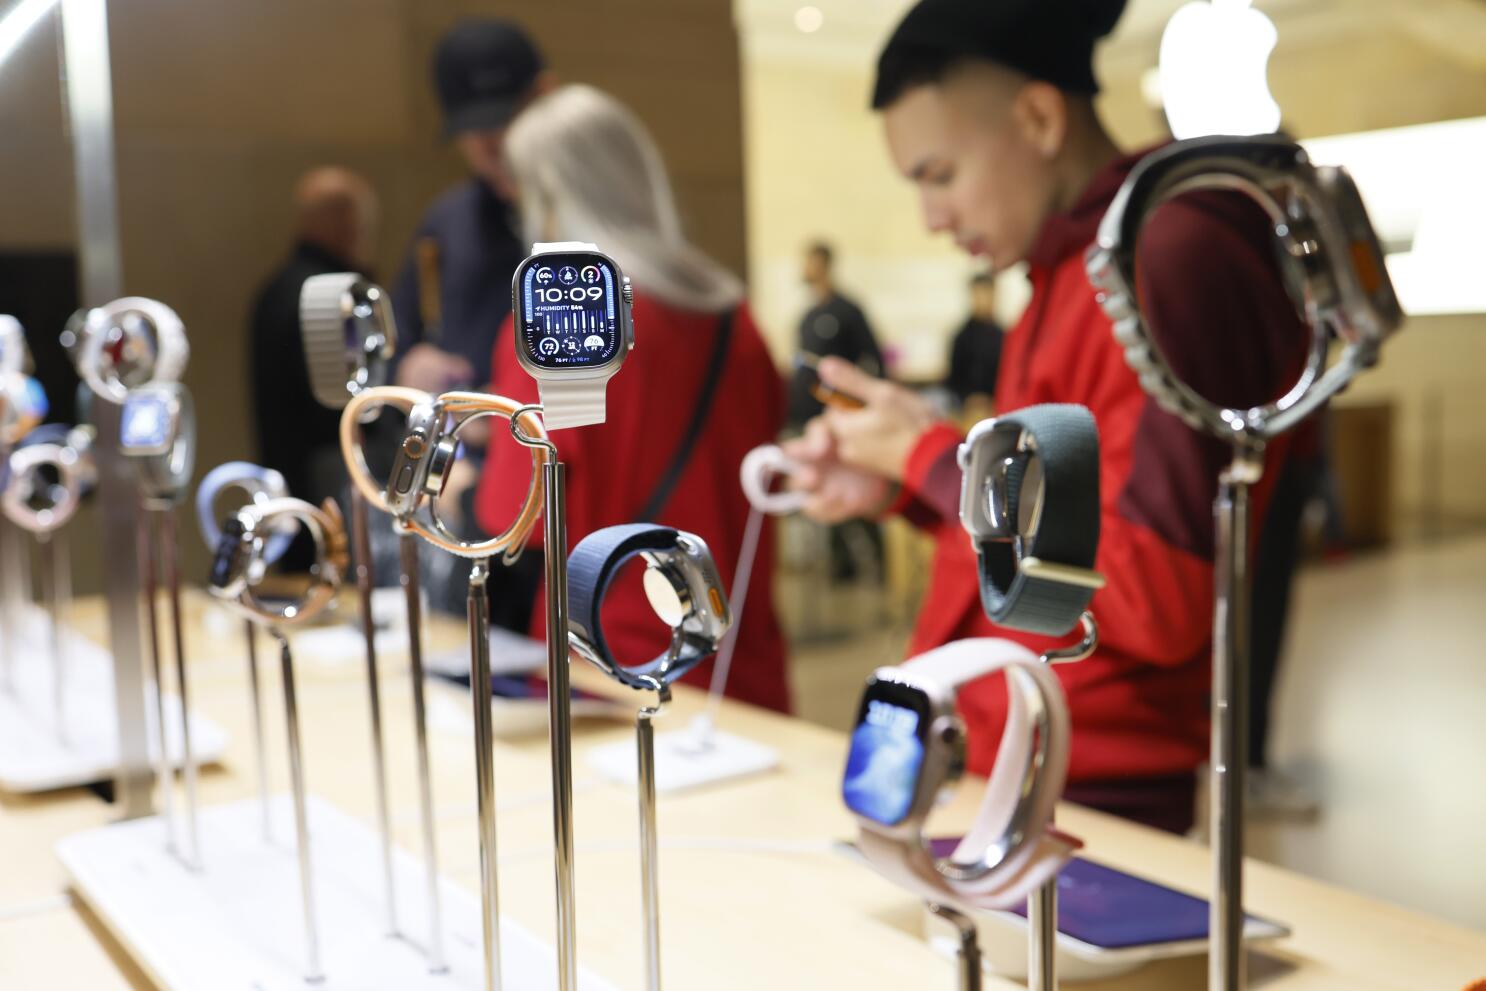 Apple loses attempt to halt Apple Watch sales ban - The Verge